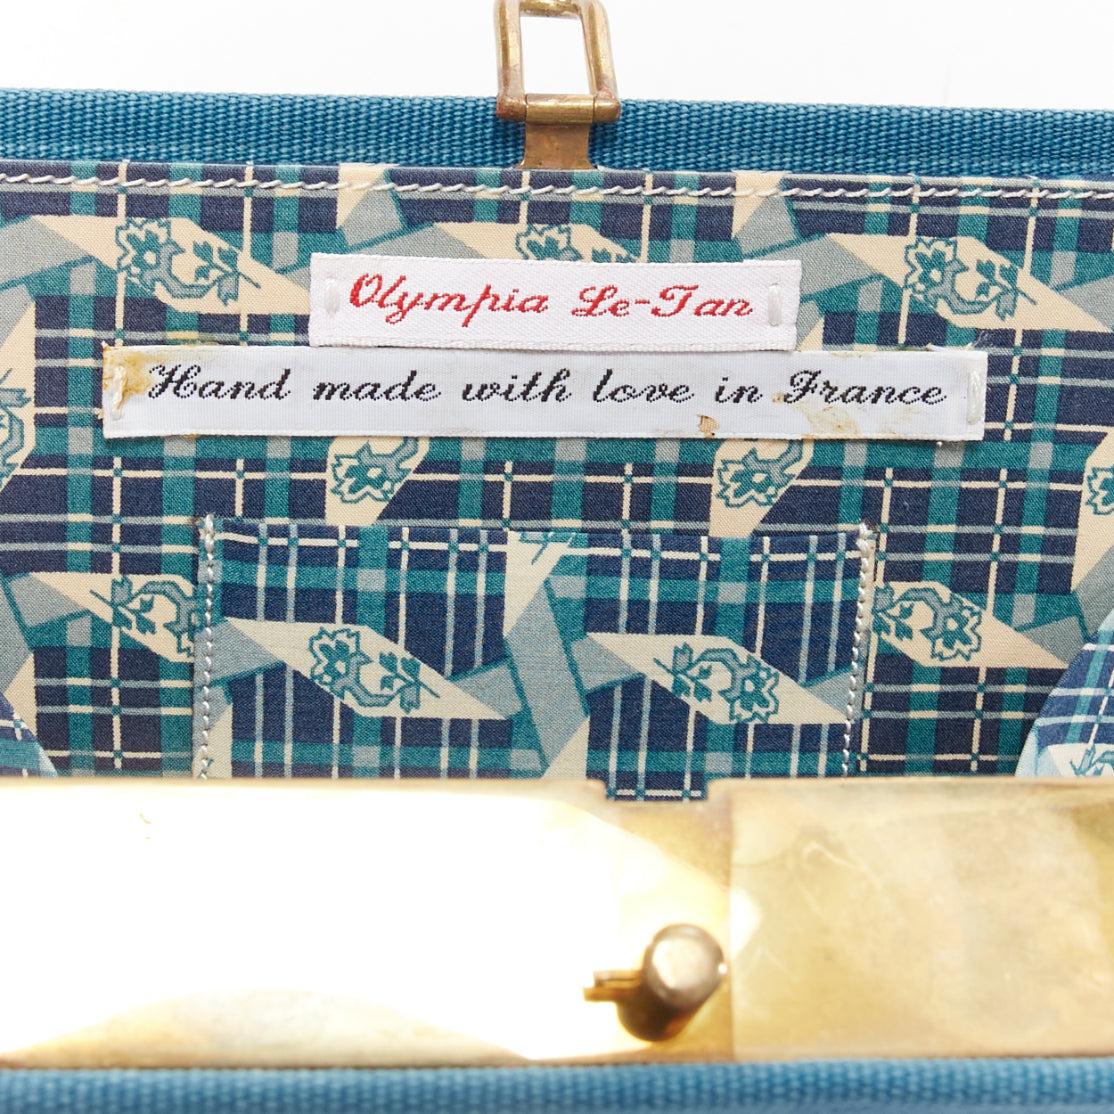 OLYMPIA LE TAN Why Worry blue fabric embroidery gold mini book box clutch bag 6